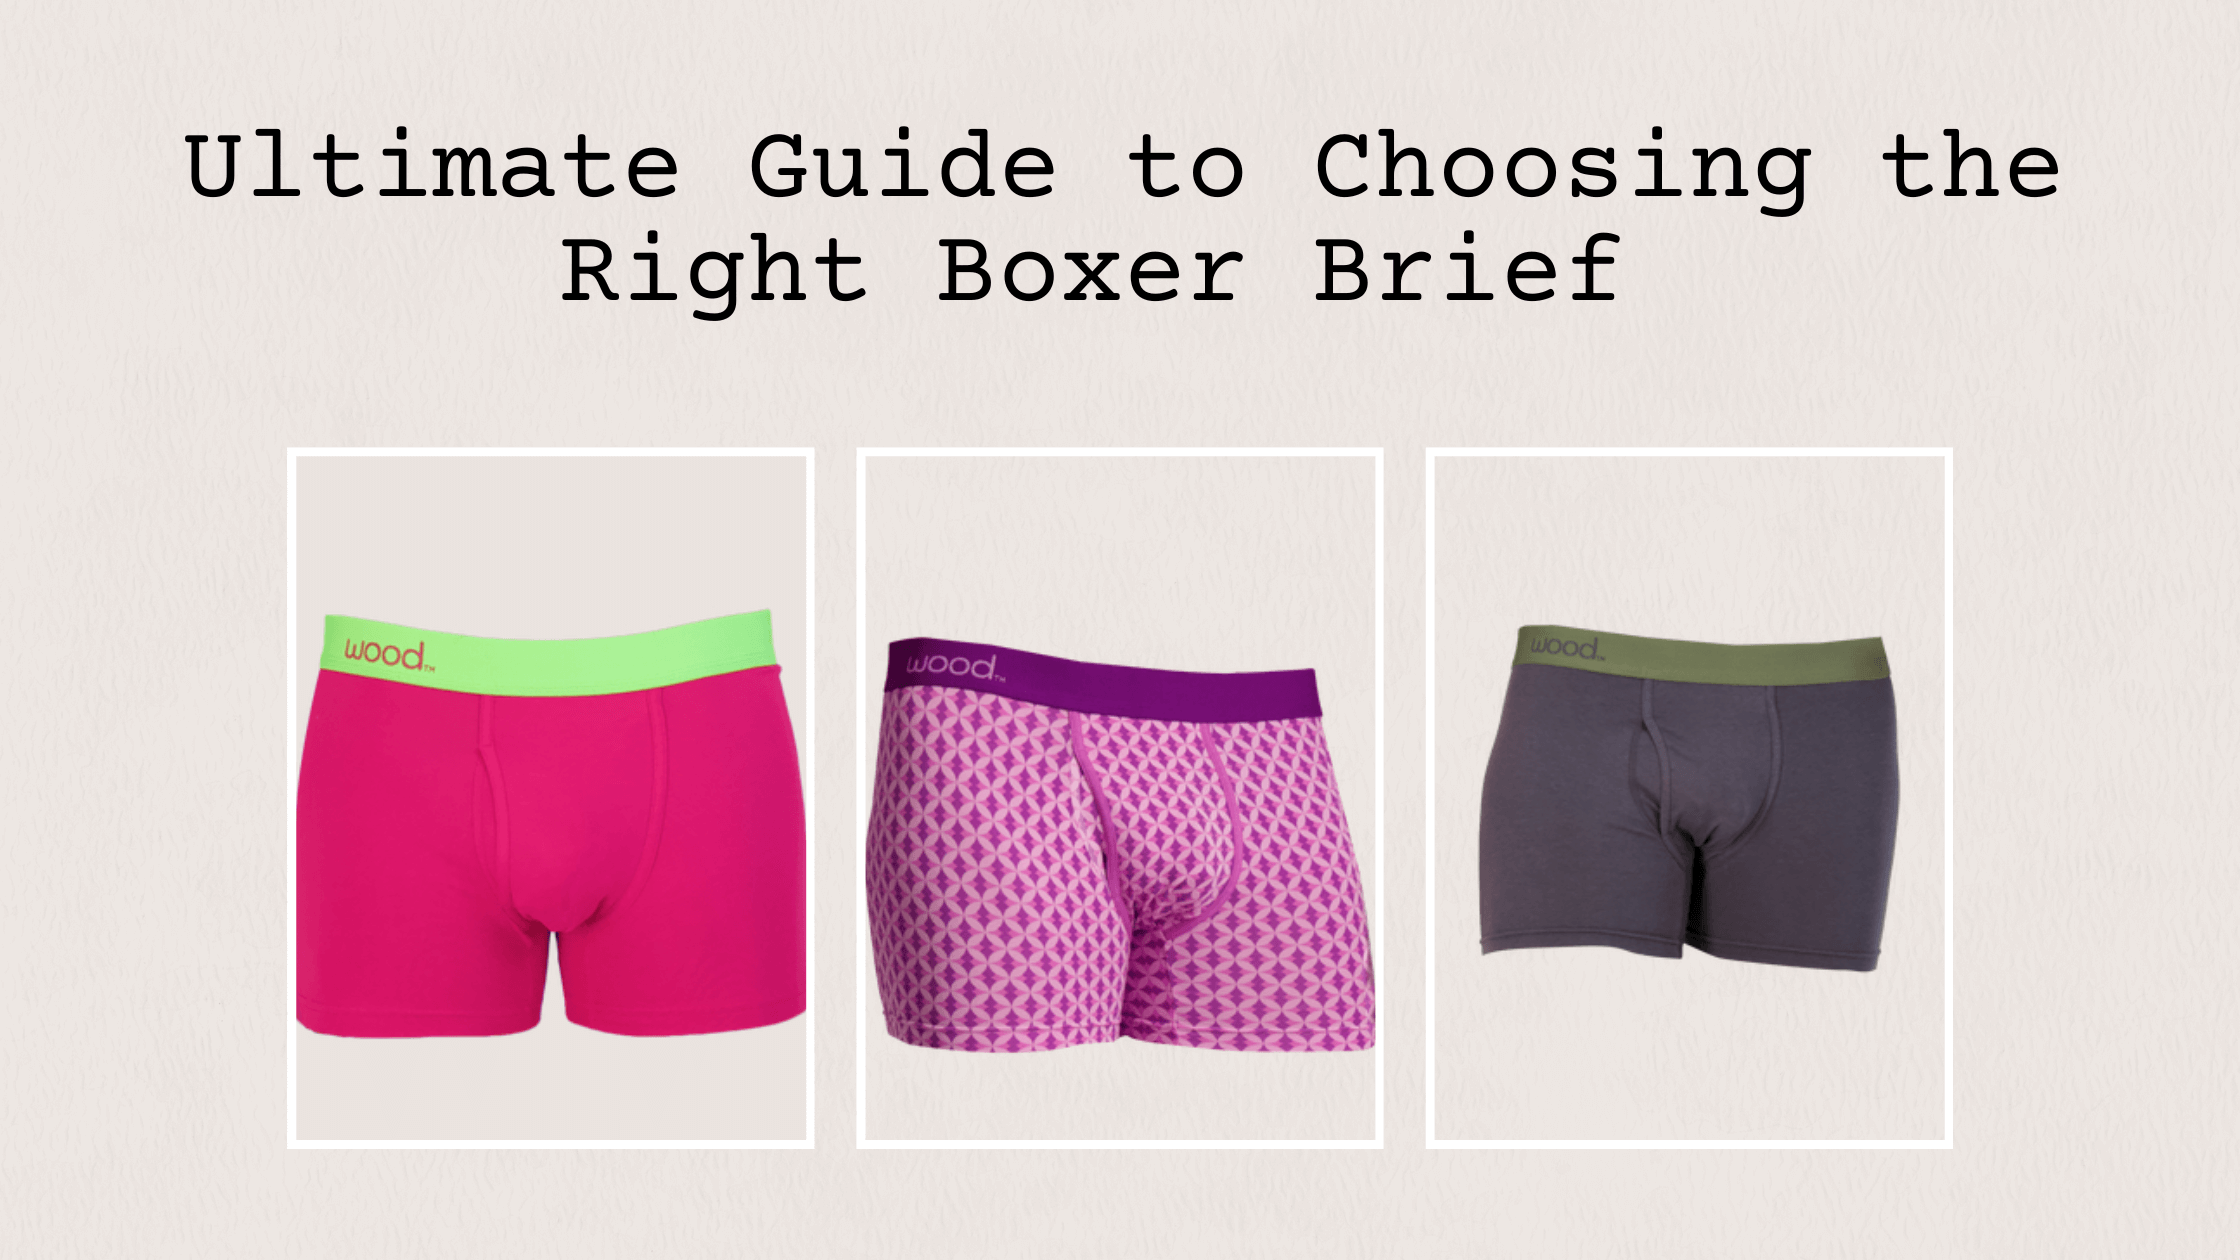 The Ultimate Guide to Choosing the Right Boxer Brief Underwear for